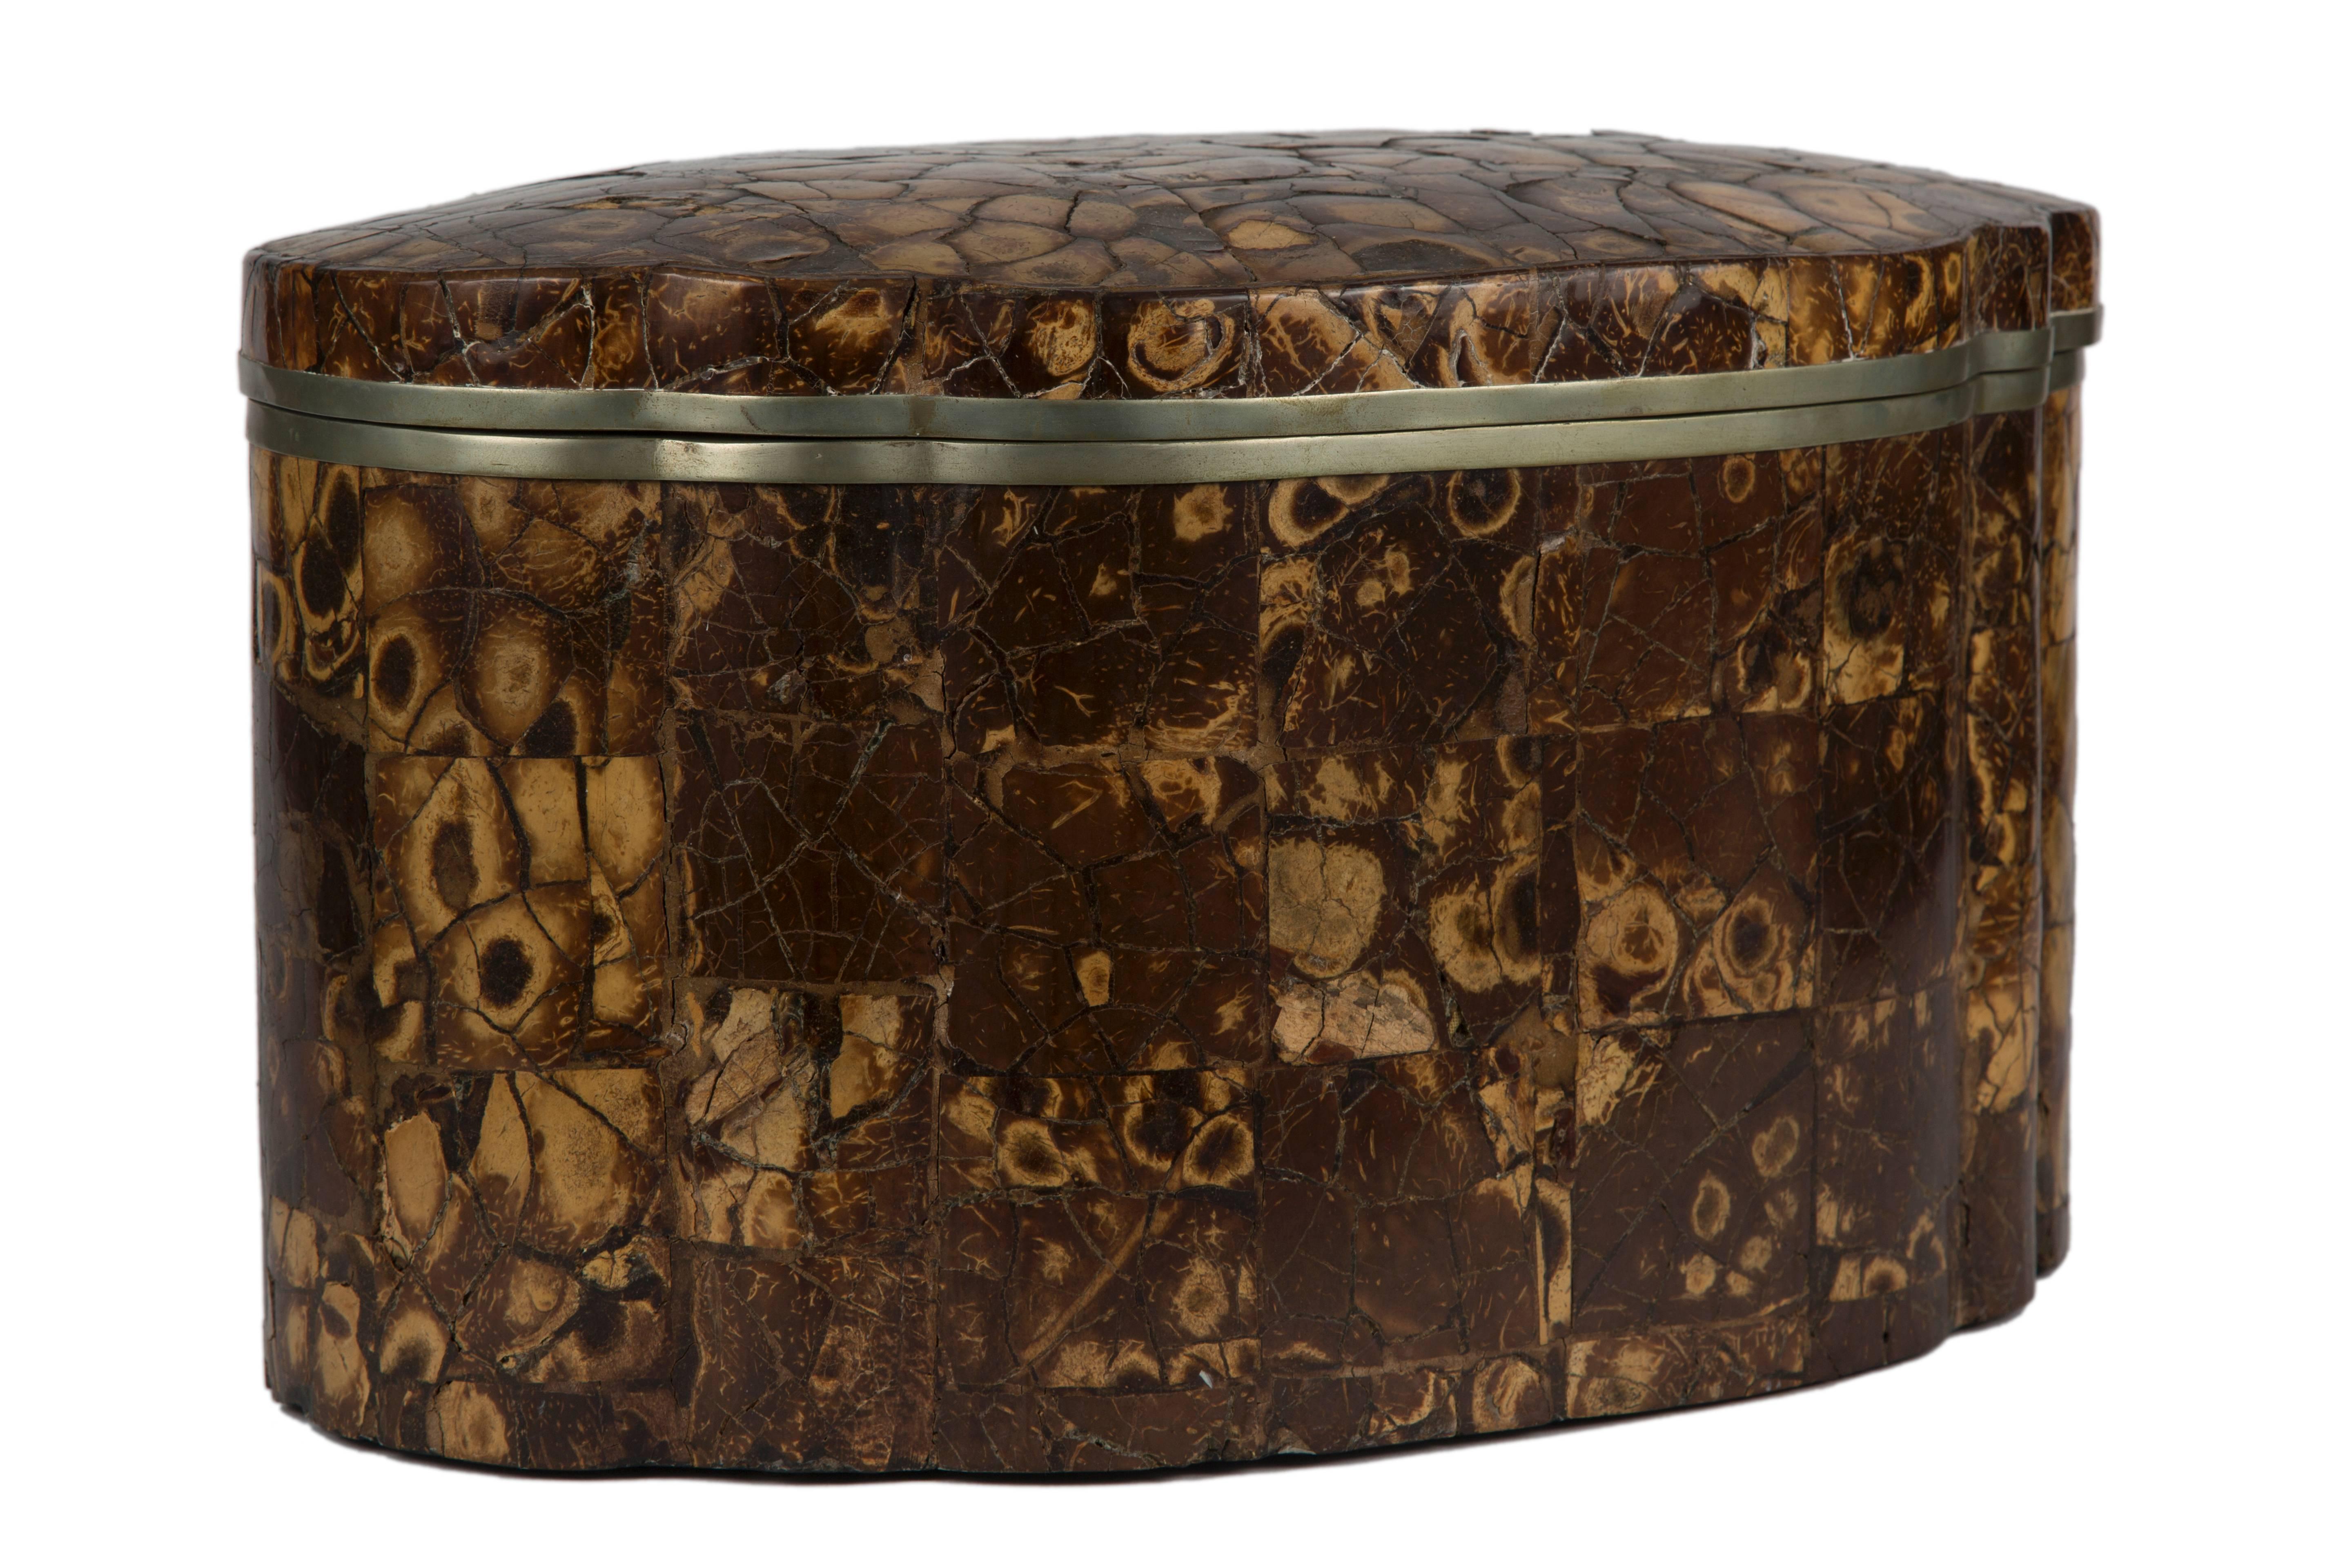 Large lidded tortoiseshell box with metal framing, 
20th century
H 9 in.; W 16 in.; D 10 in.
